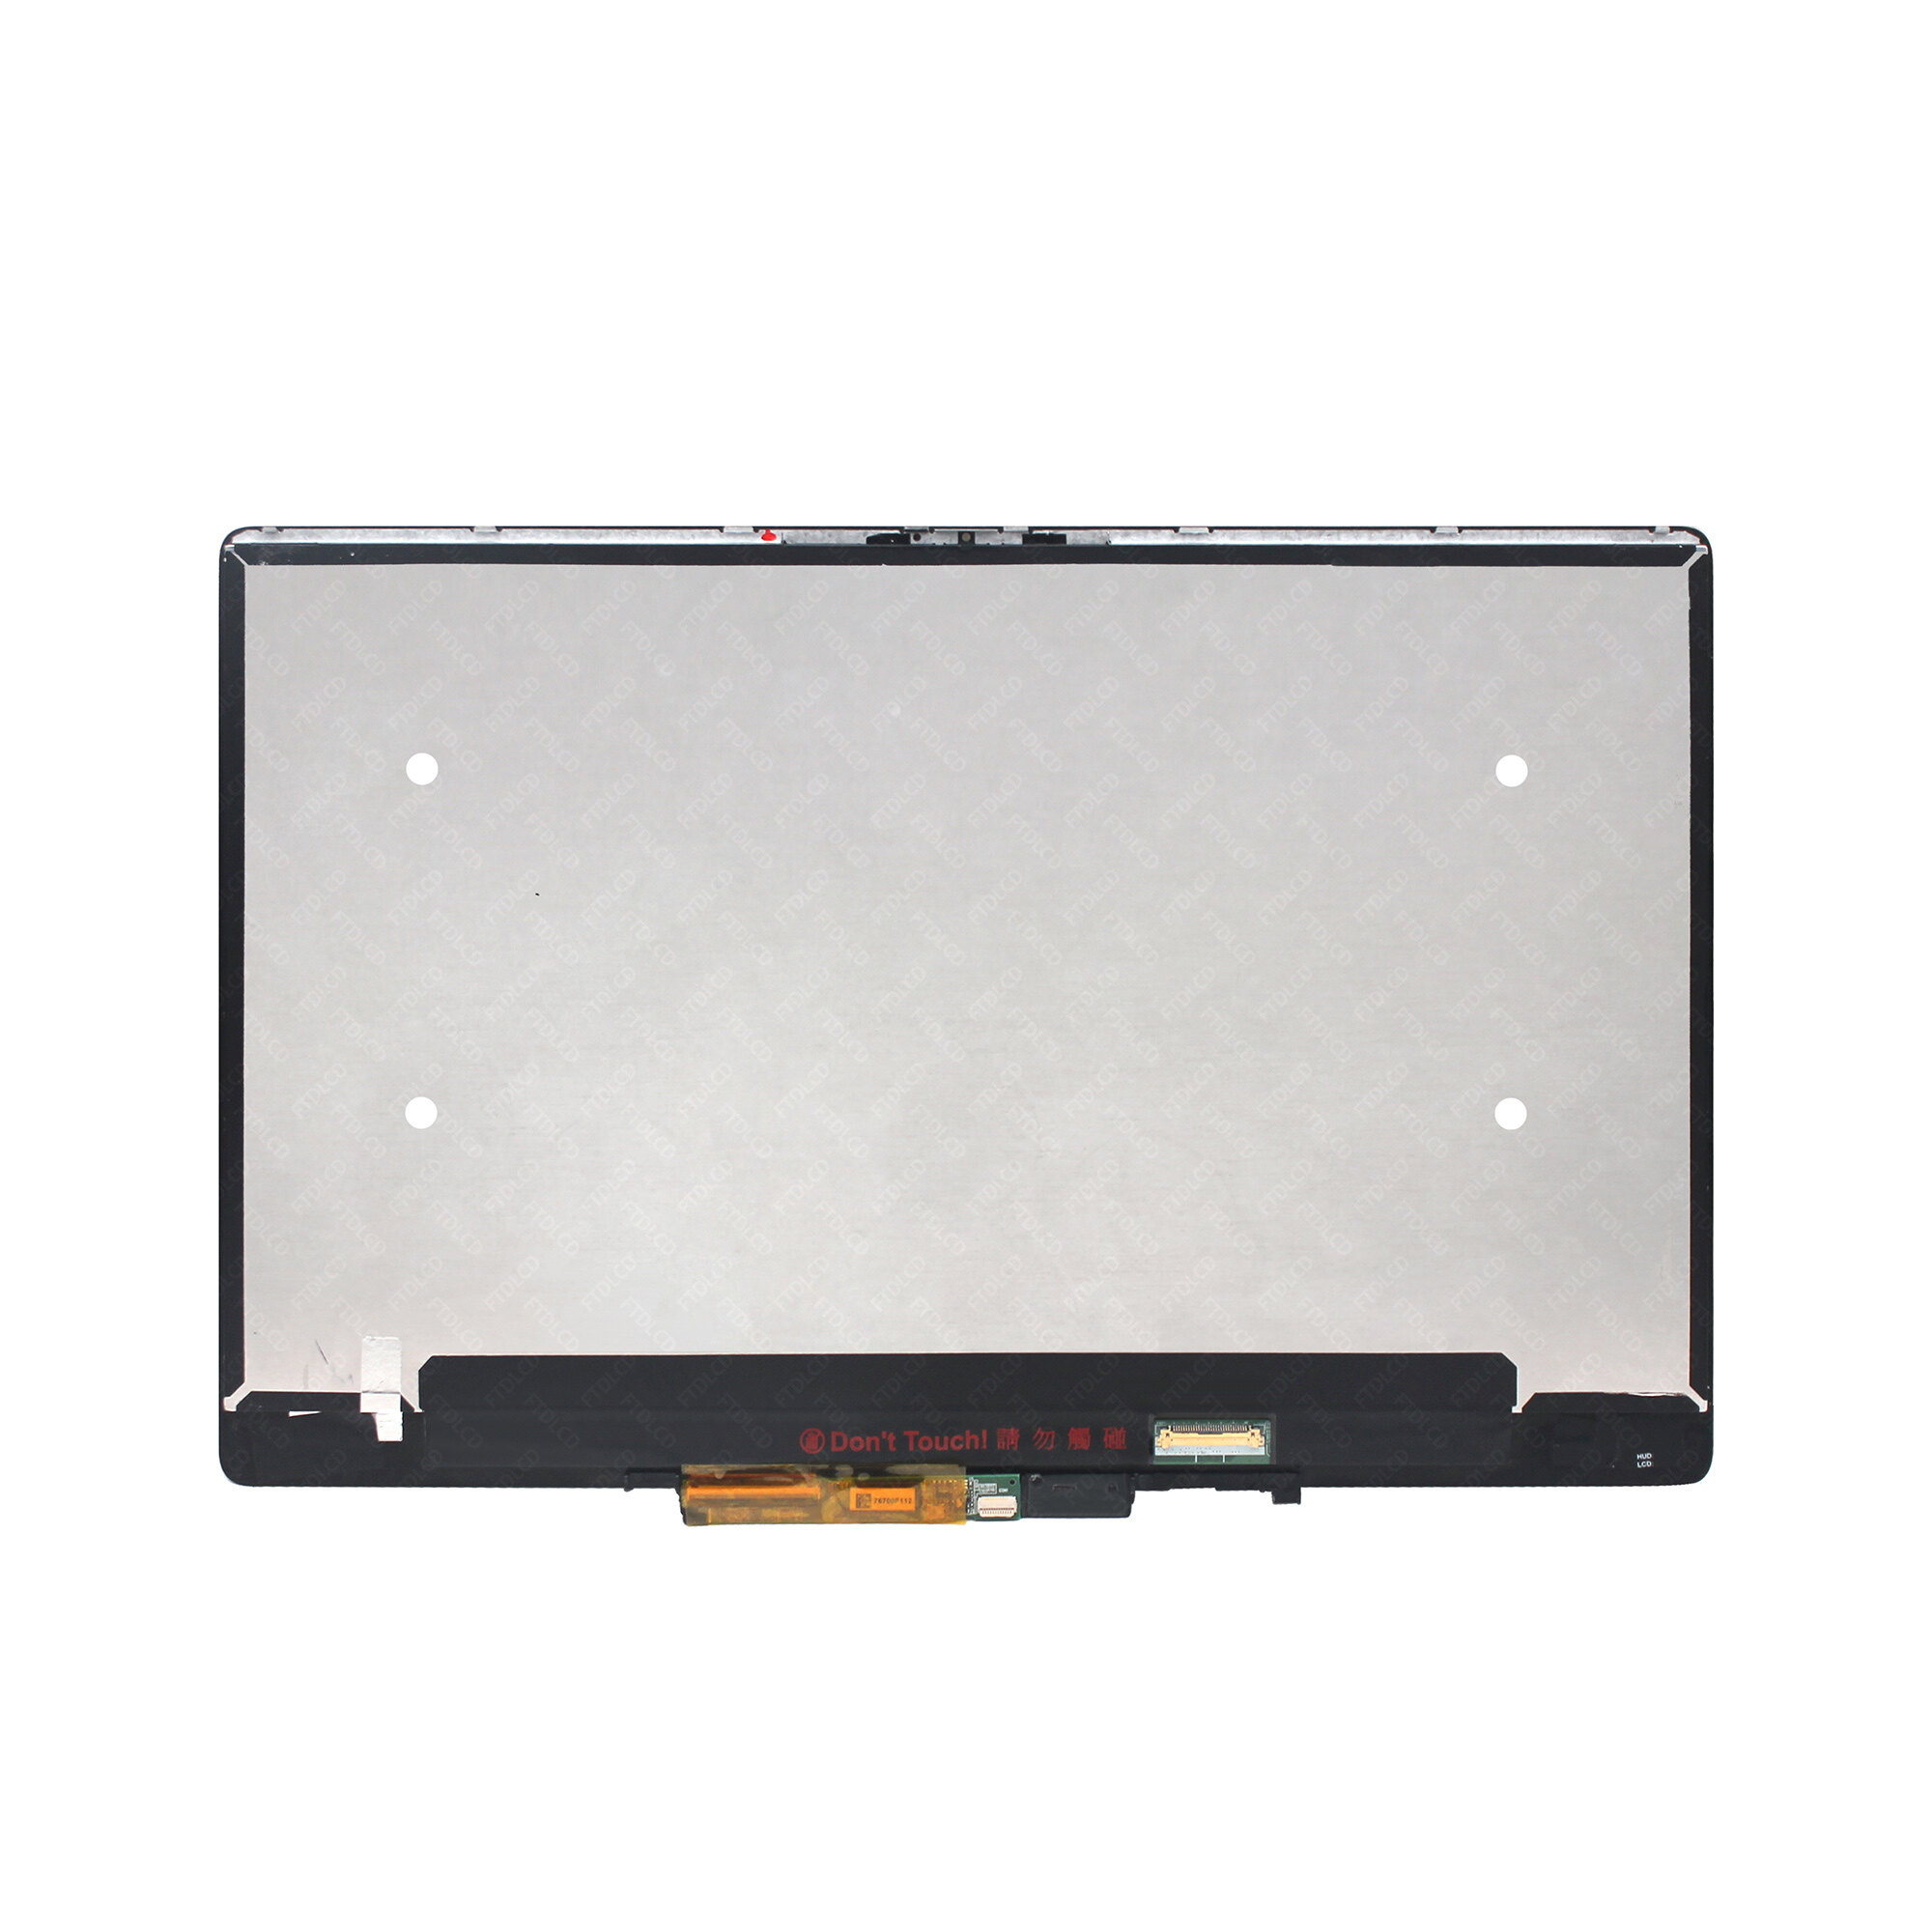 Kreplacement 4K UHD LED LCD Touch Screen Digitizer Display Assembly for Dell Inspiron 13 7386